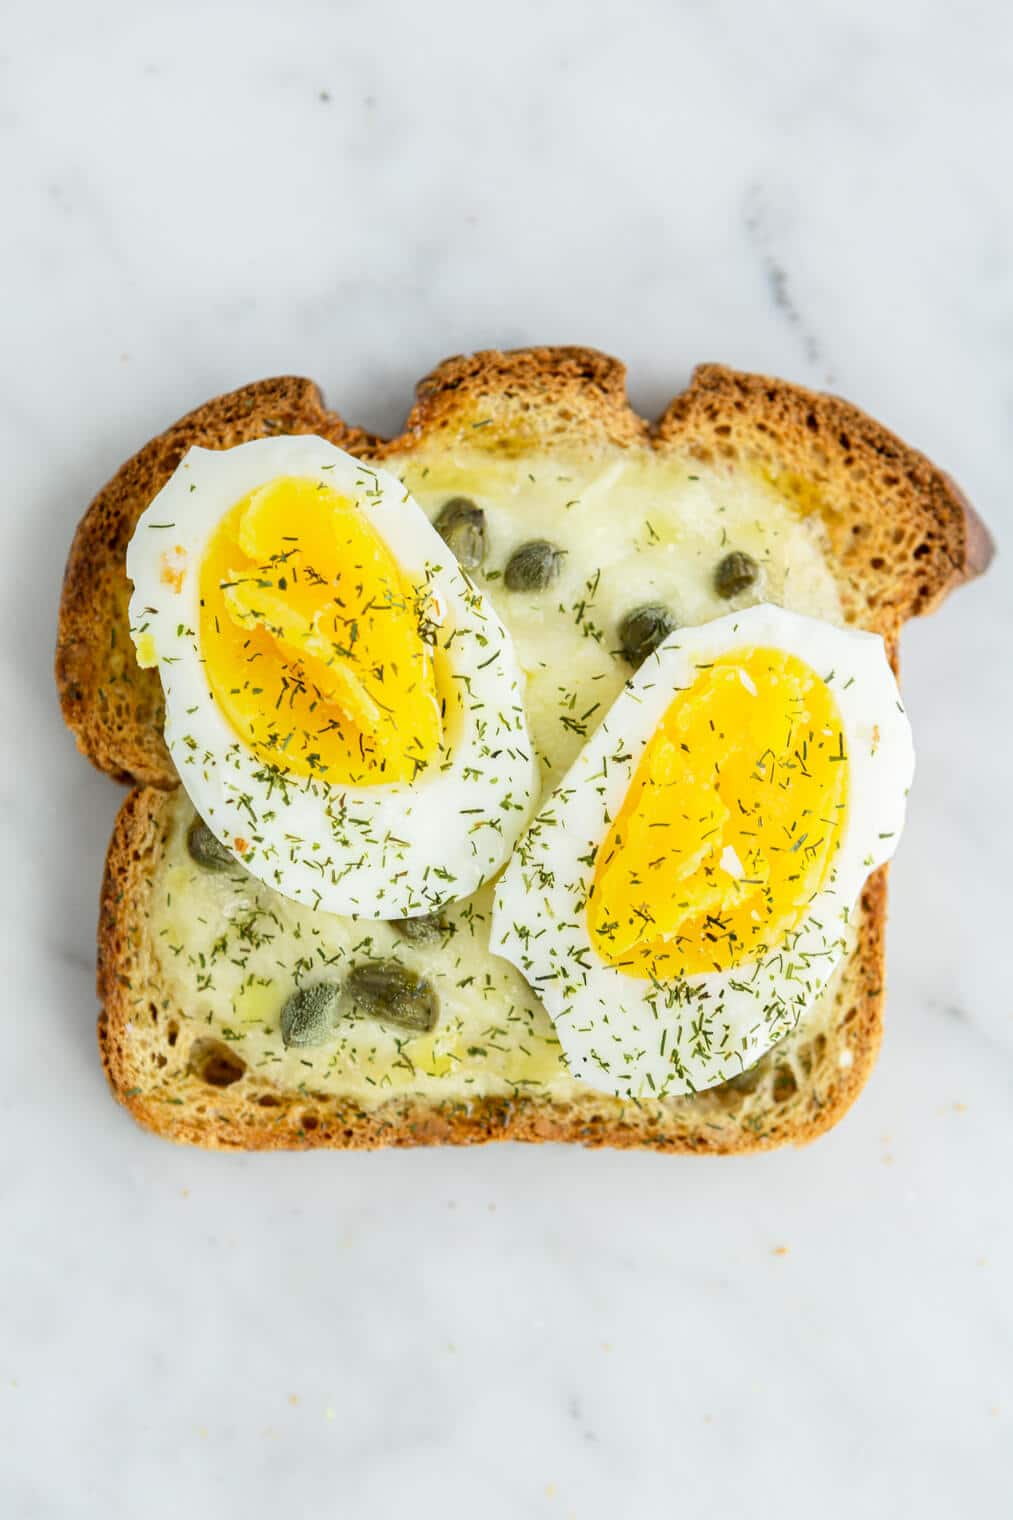 Egg, caper, and dill yogurt toast on a grey and white marble surface.